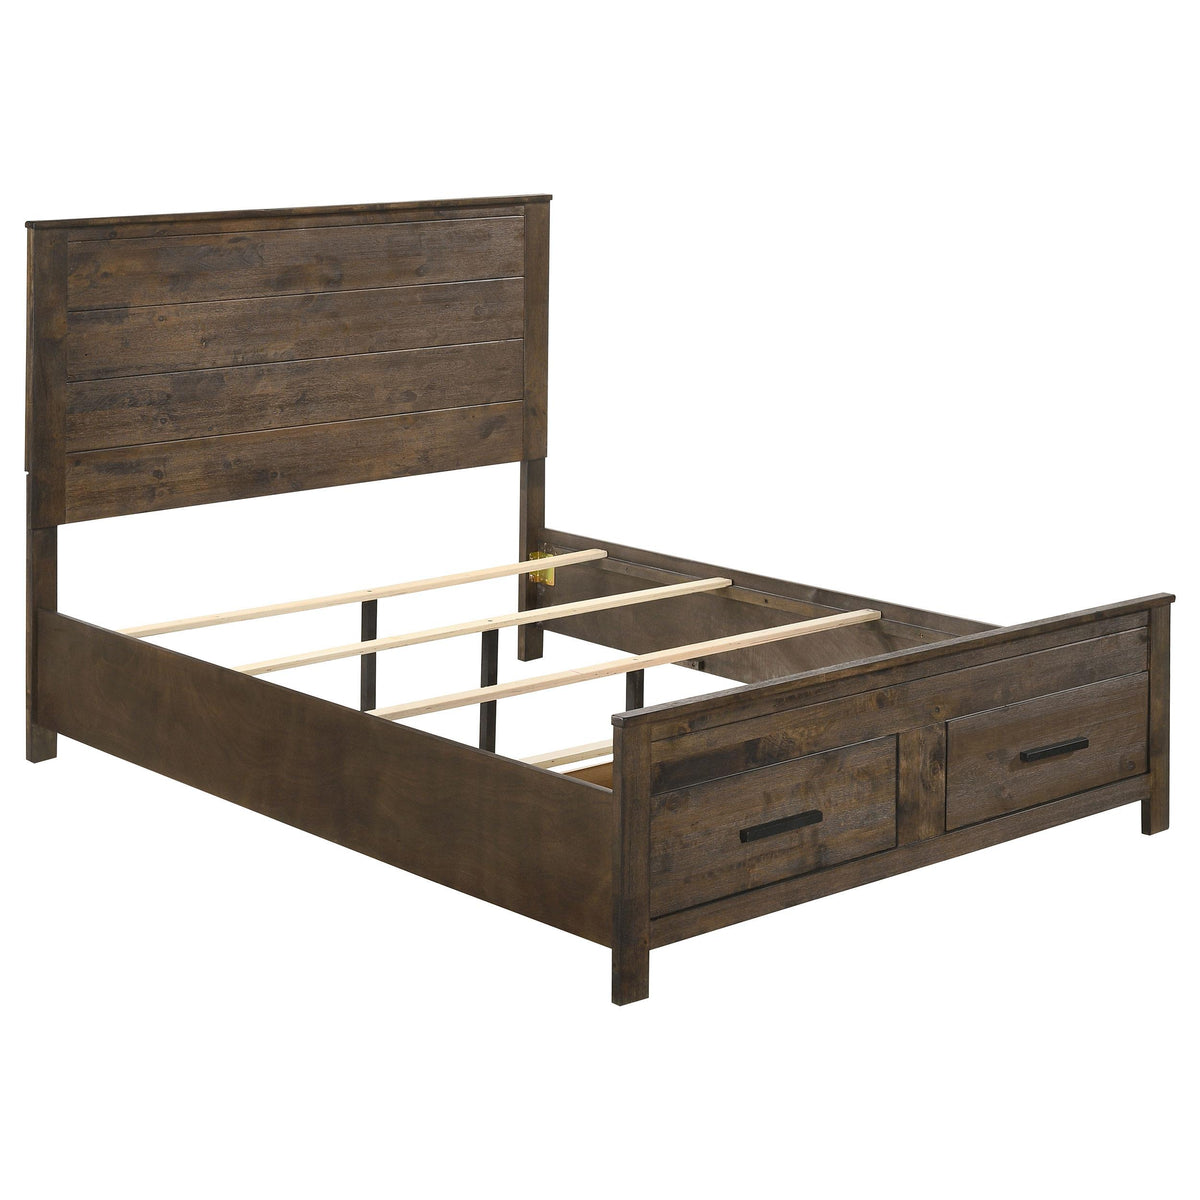 Woodmont California King Storage Bed Rustic Golden Brown Woodmont California King Storage Bed Rustic Golden Brown Half Price Furniture